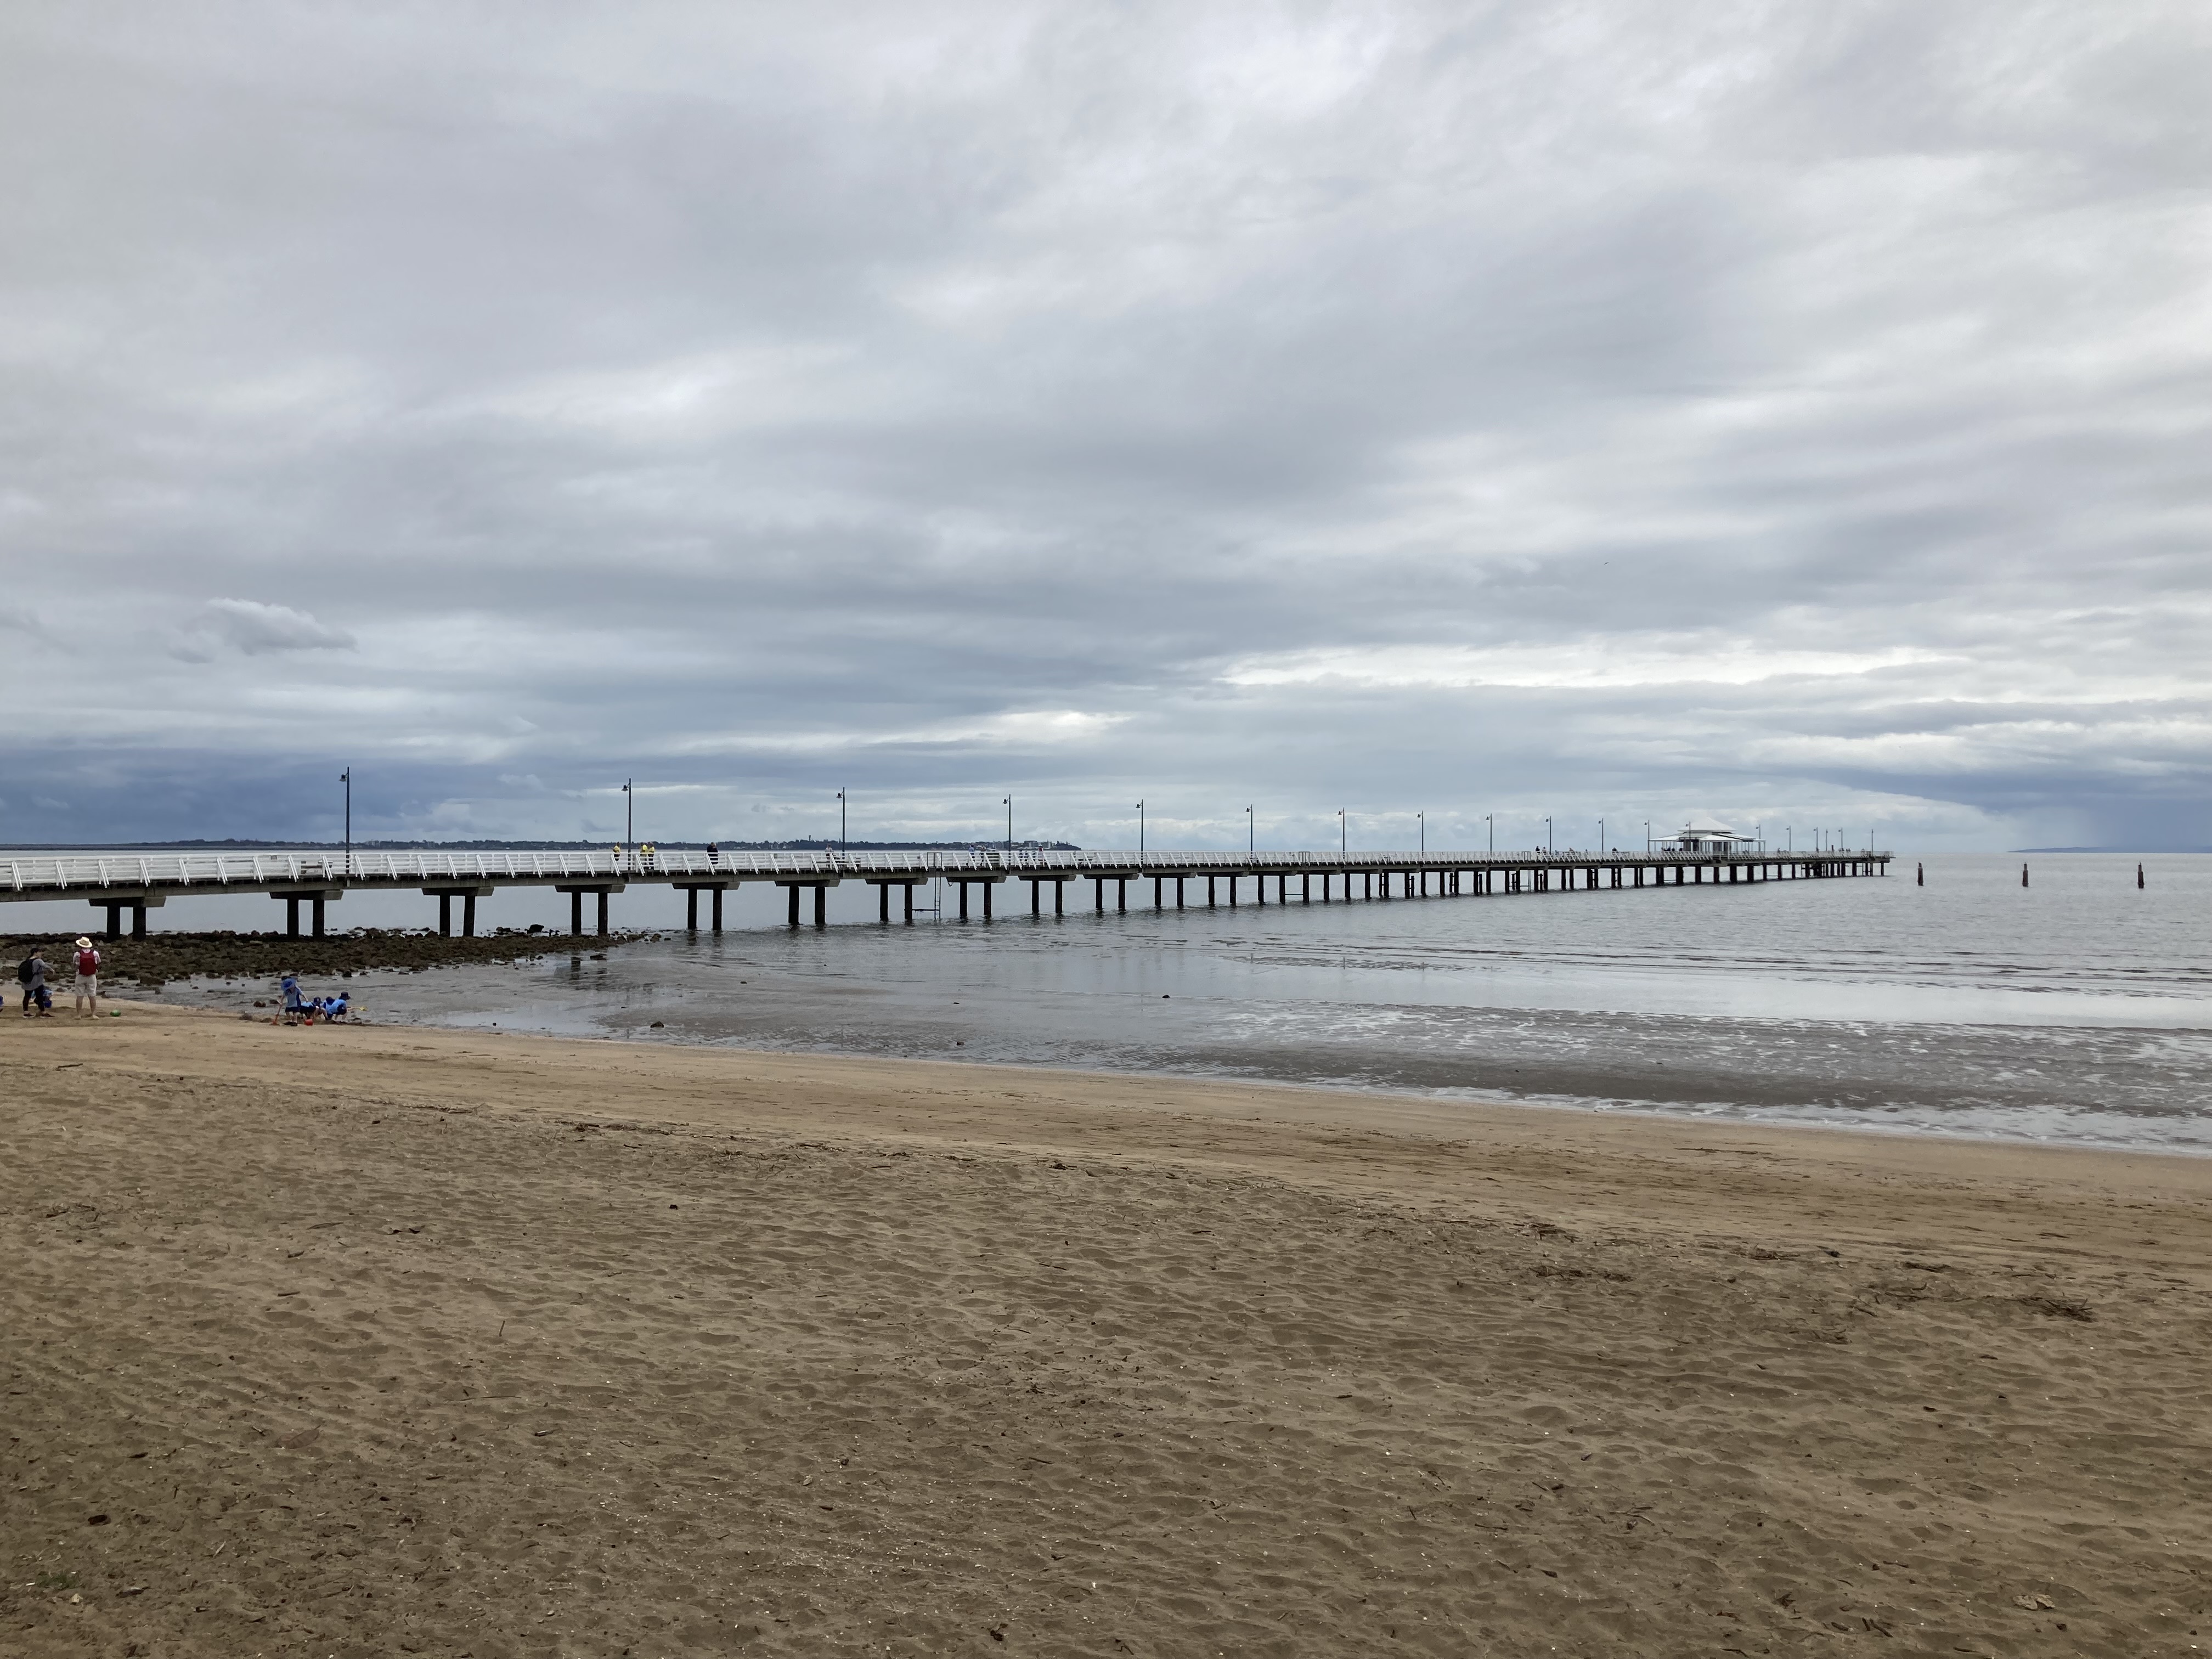 A long timber jetty, with a white roofed structure at the end, and a open sandy beach in the foreground